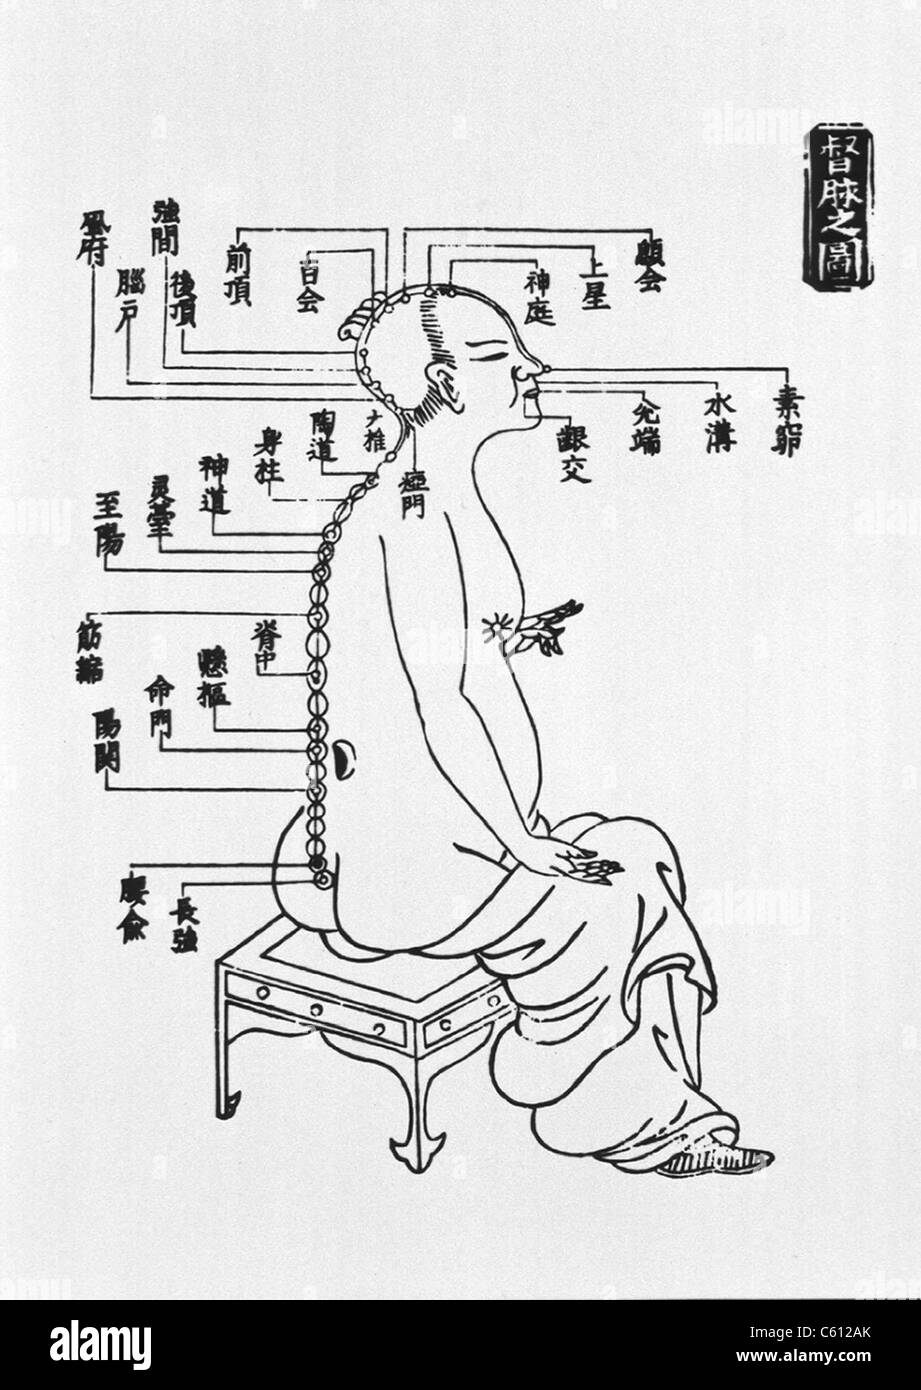 Human figure shown in right profile with acupuncture points along meridians of the spine, head, and leg. Illustration from early Chinese medical textbook. Stock Photo